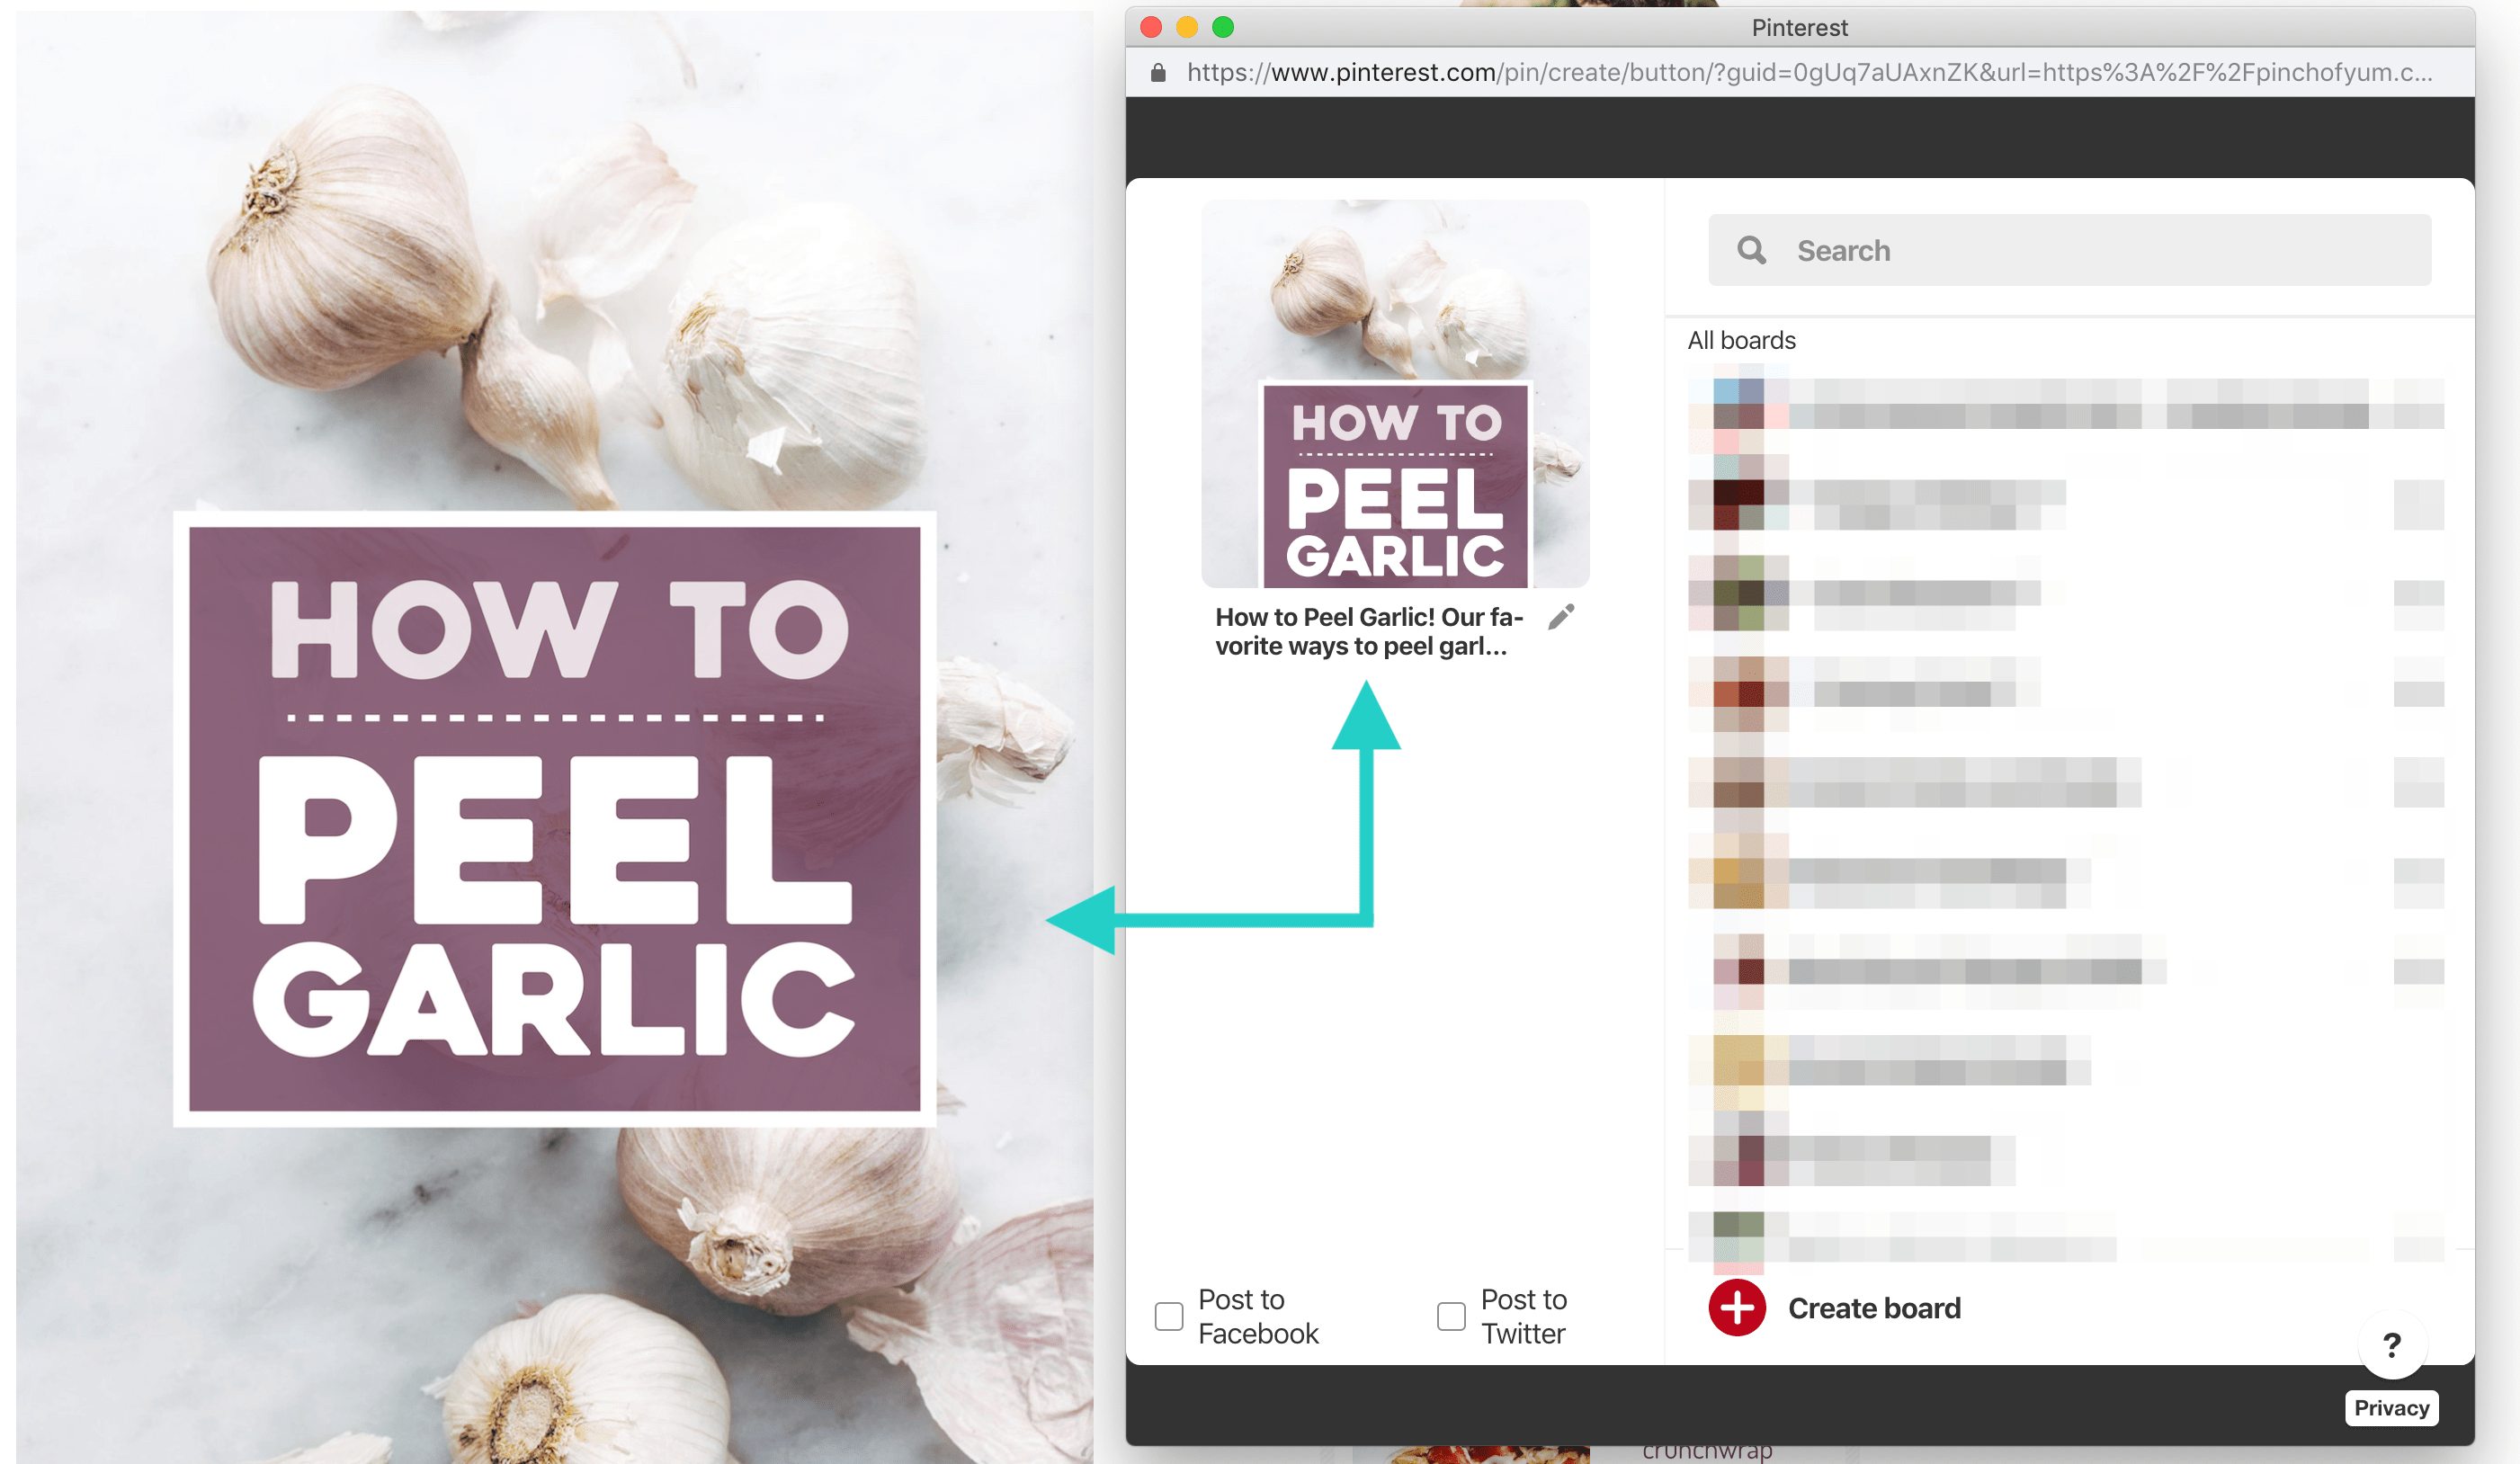 Image from the blog post is compared with the image that's being saved to Pinterest in the pin dialog